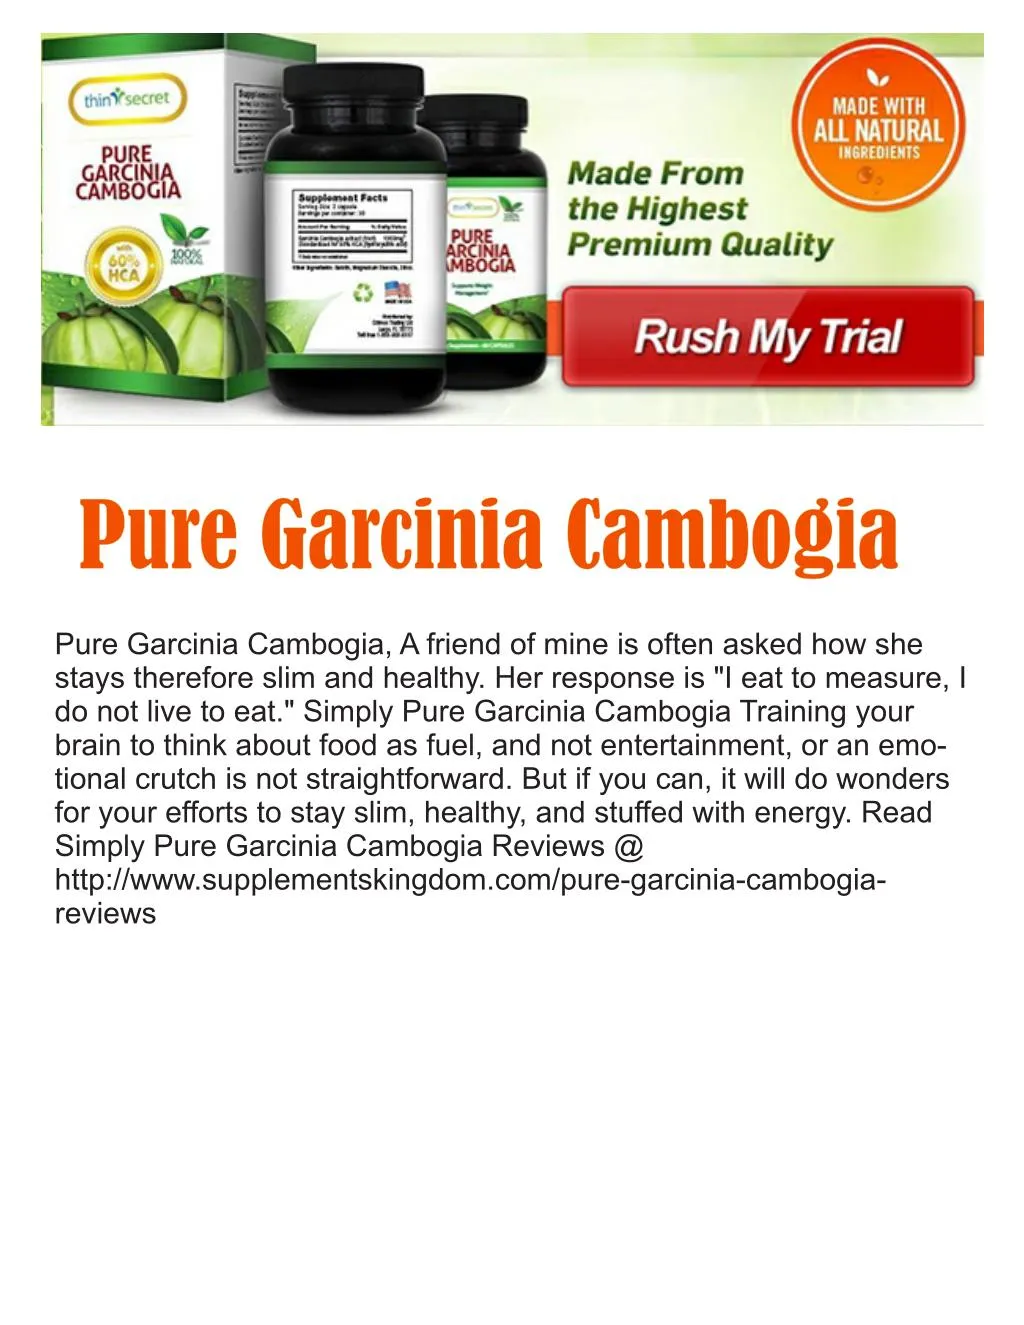 So...is it true? Can garcinia cambogia help you lose weight?